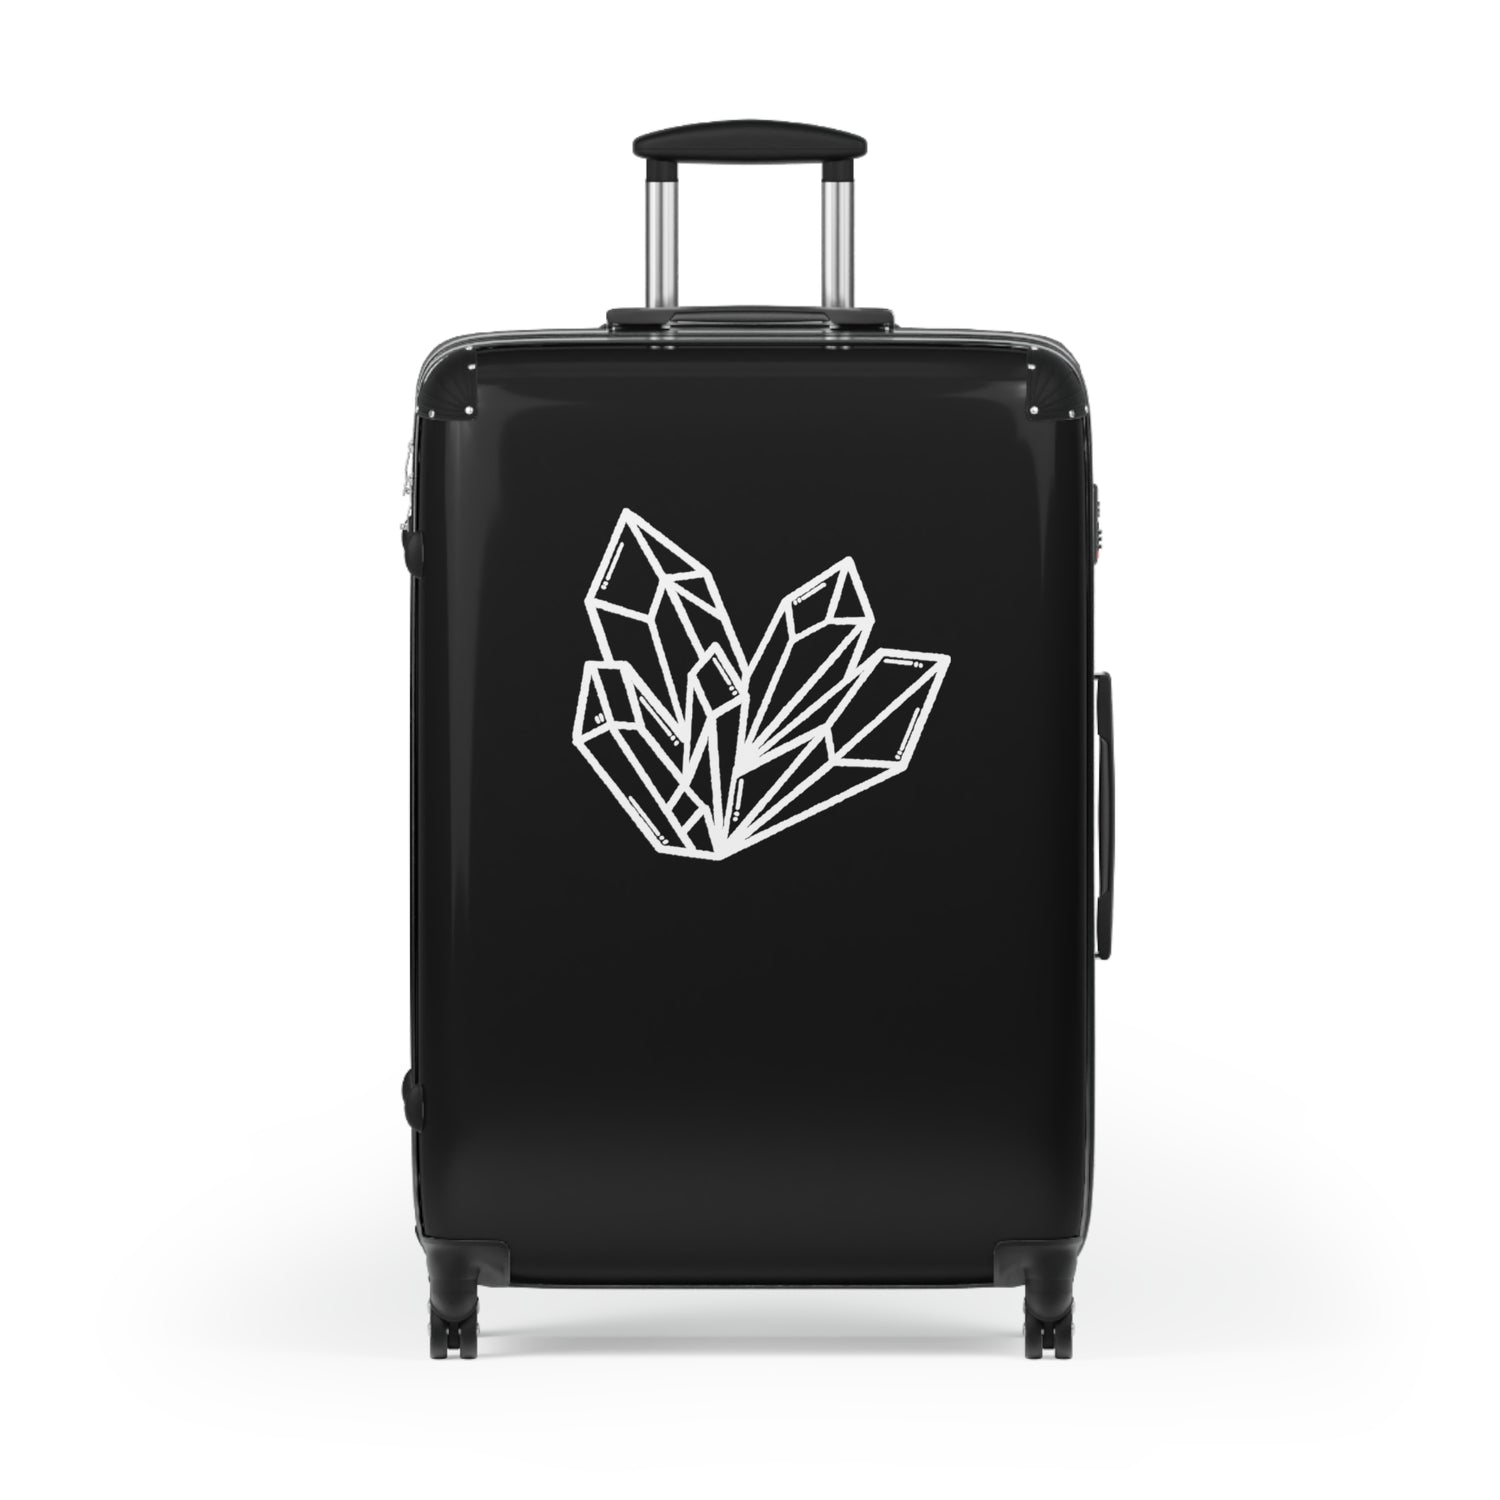 Suitcase with Crystals Design